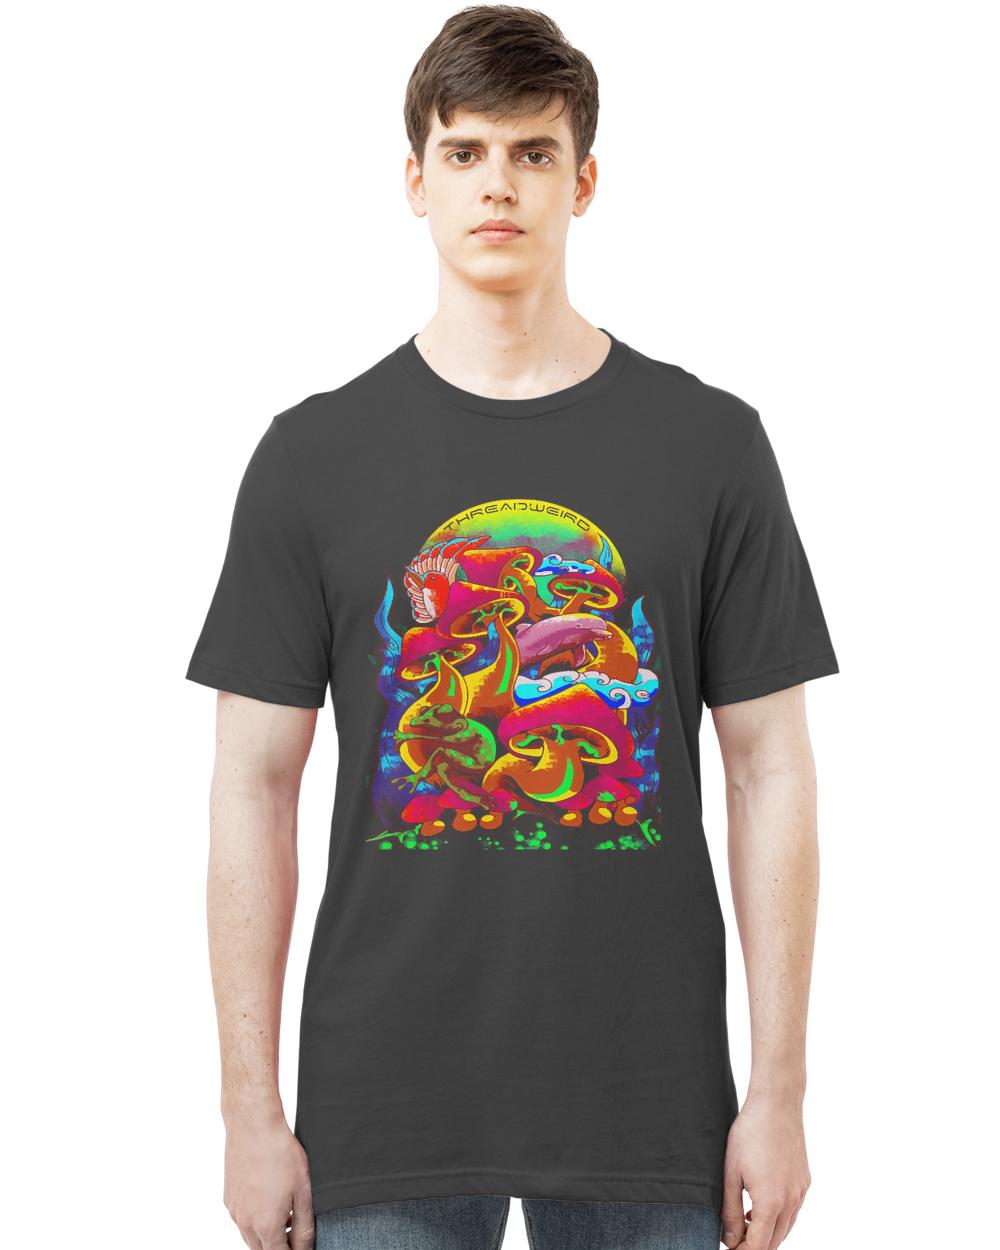 Psychedelic T- Shirt Psychedelic Dream T- Shirt